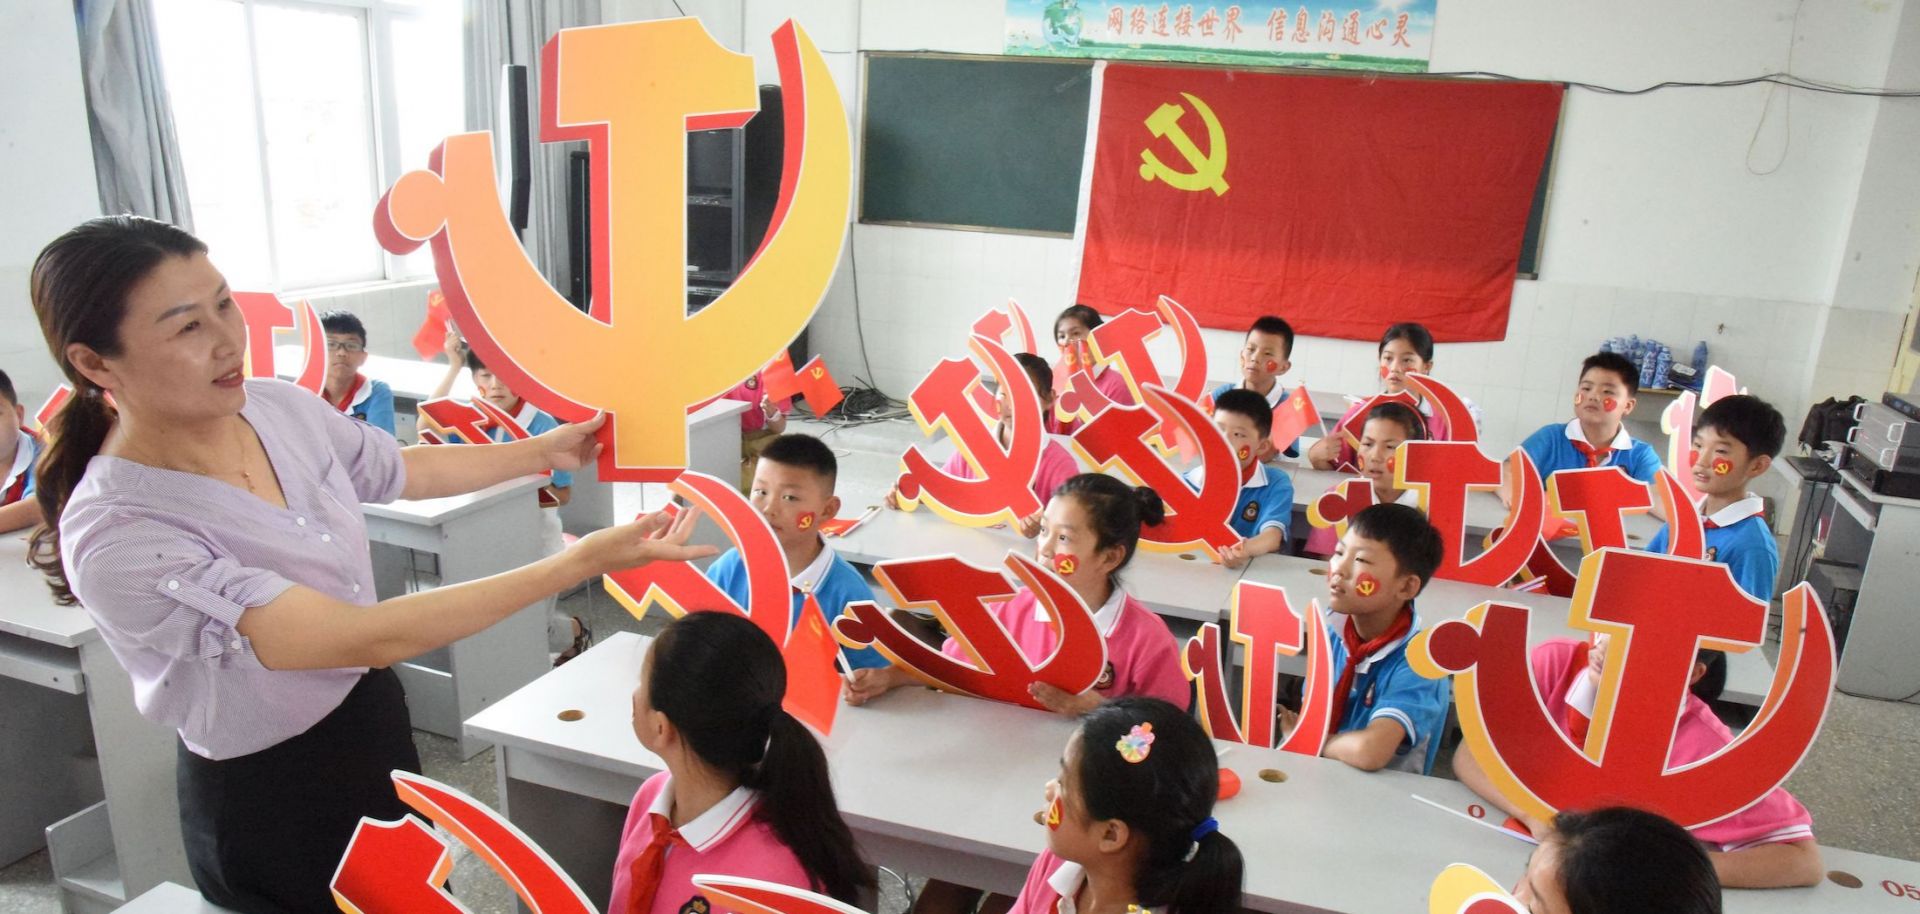 China’s ‘Family Education’ Law Portends Unrest and Political Opposition